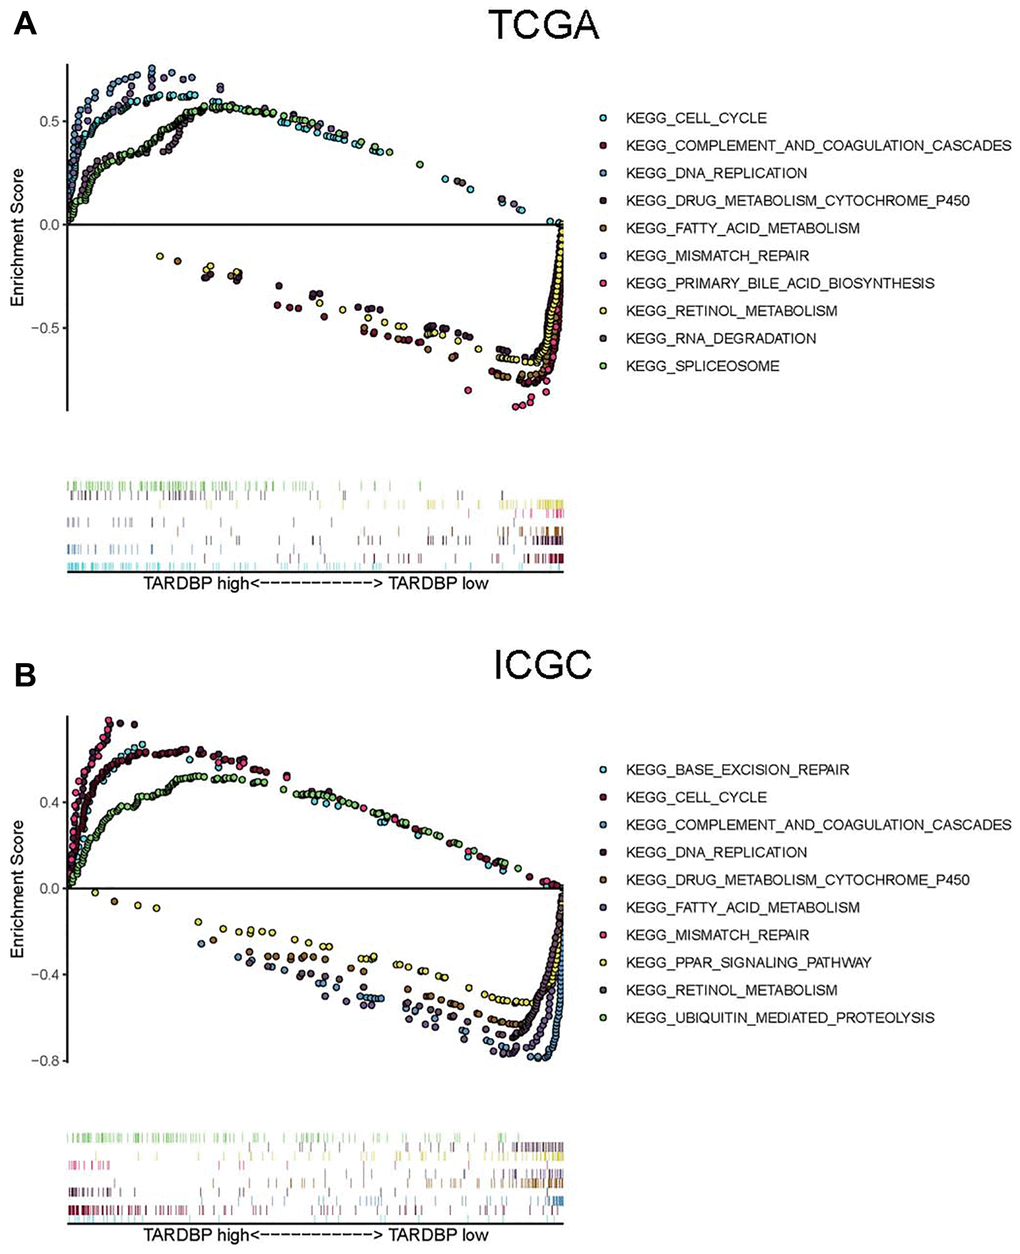 GSEA of HCC cases with TARDBP low- and high-expression in TCGA (A) or ICGC (B) projects.